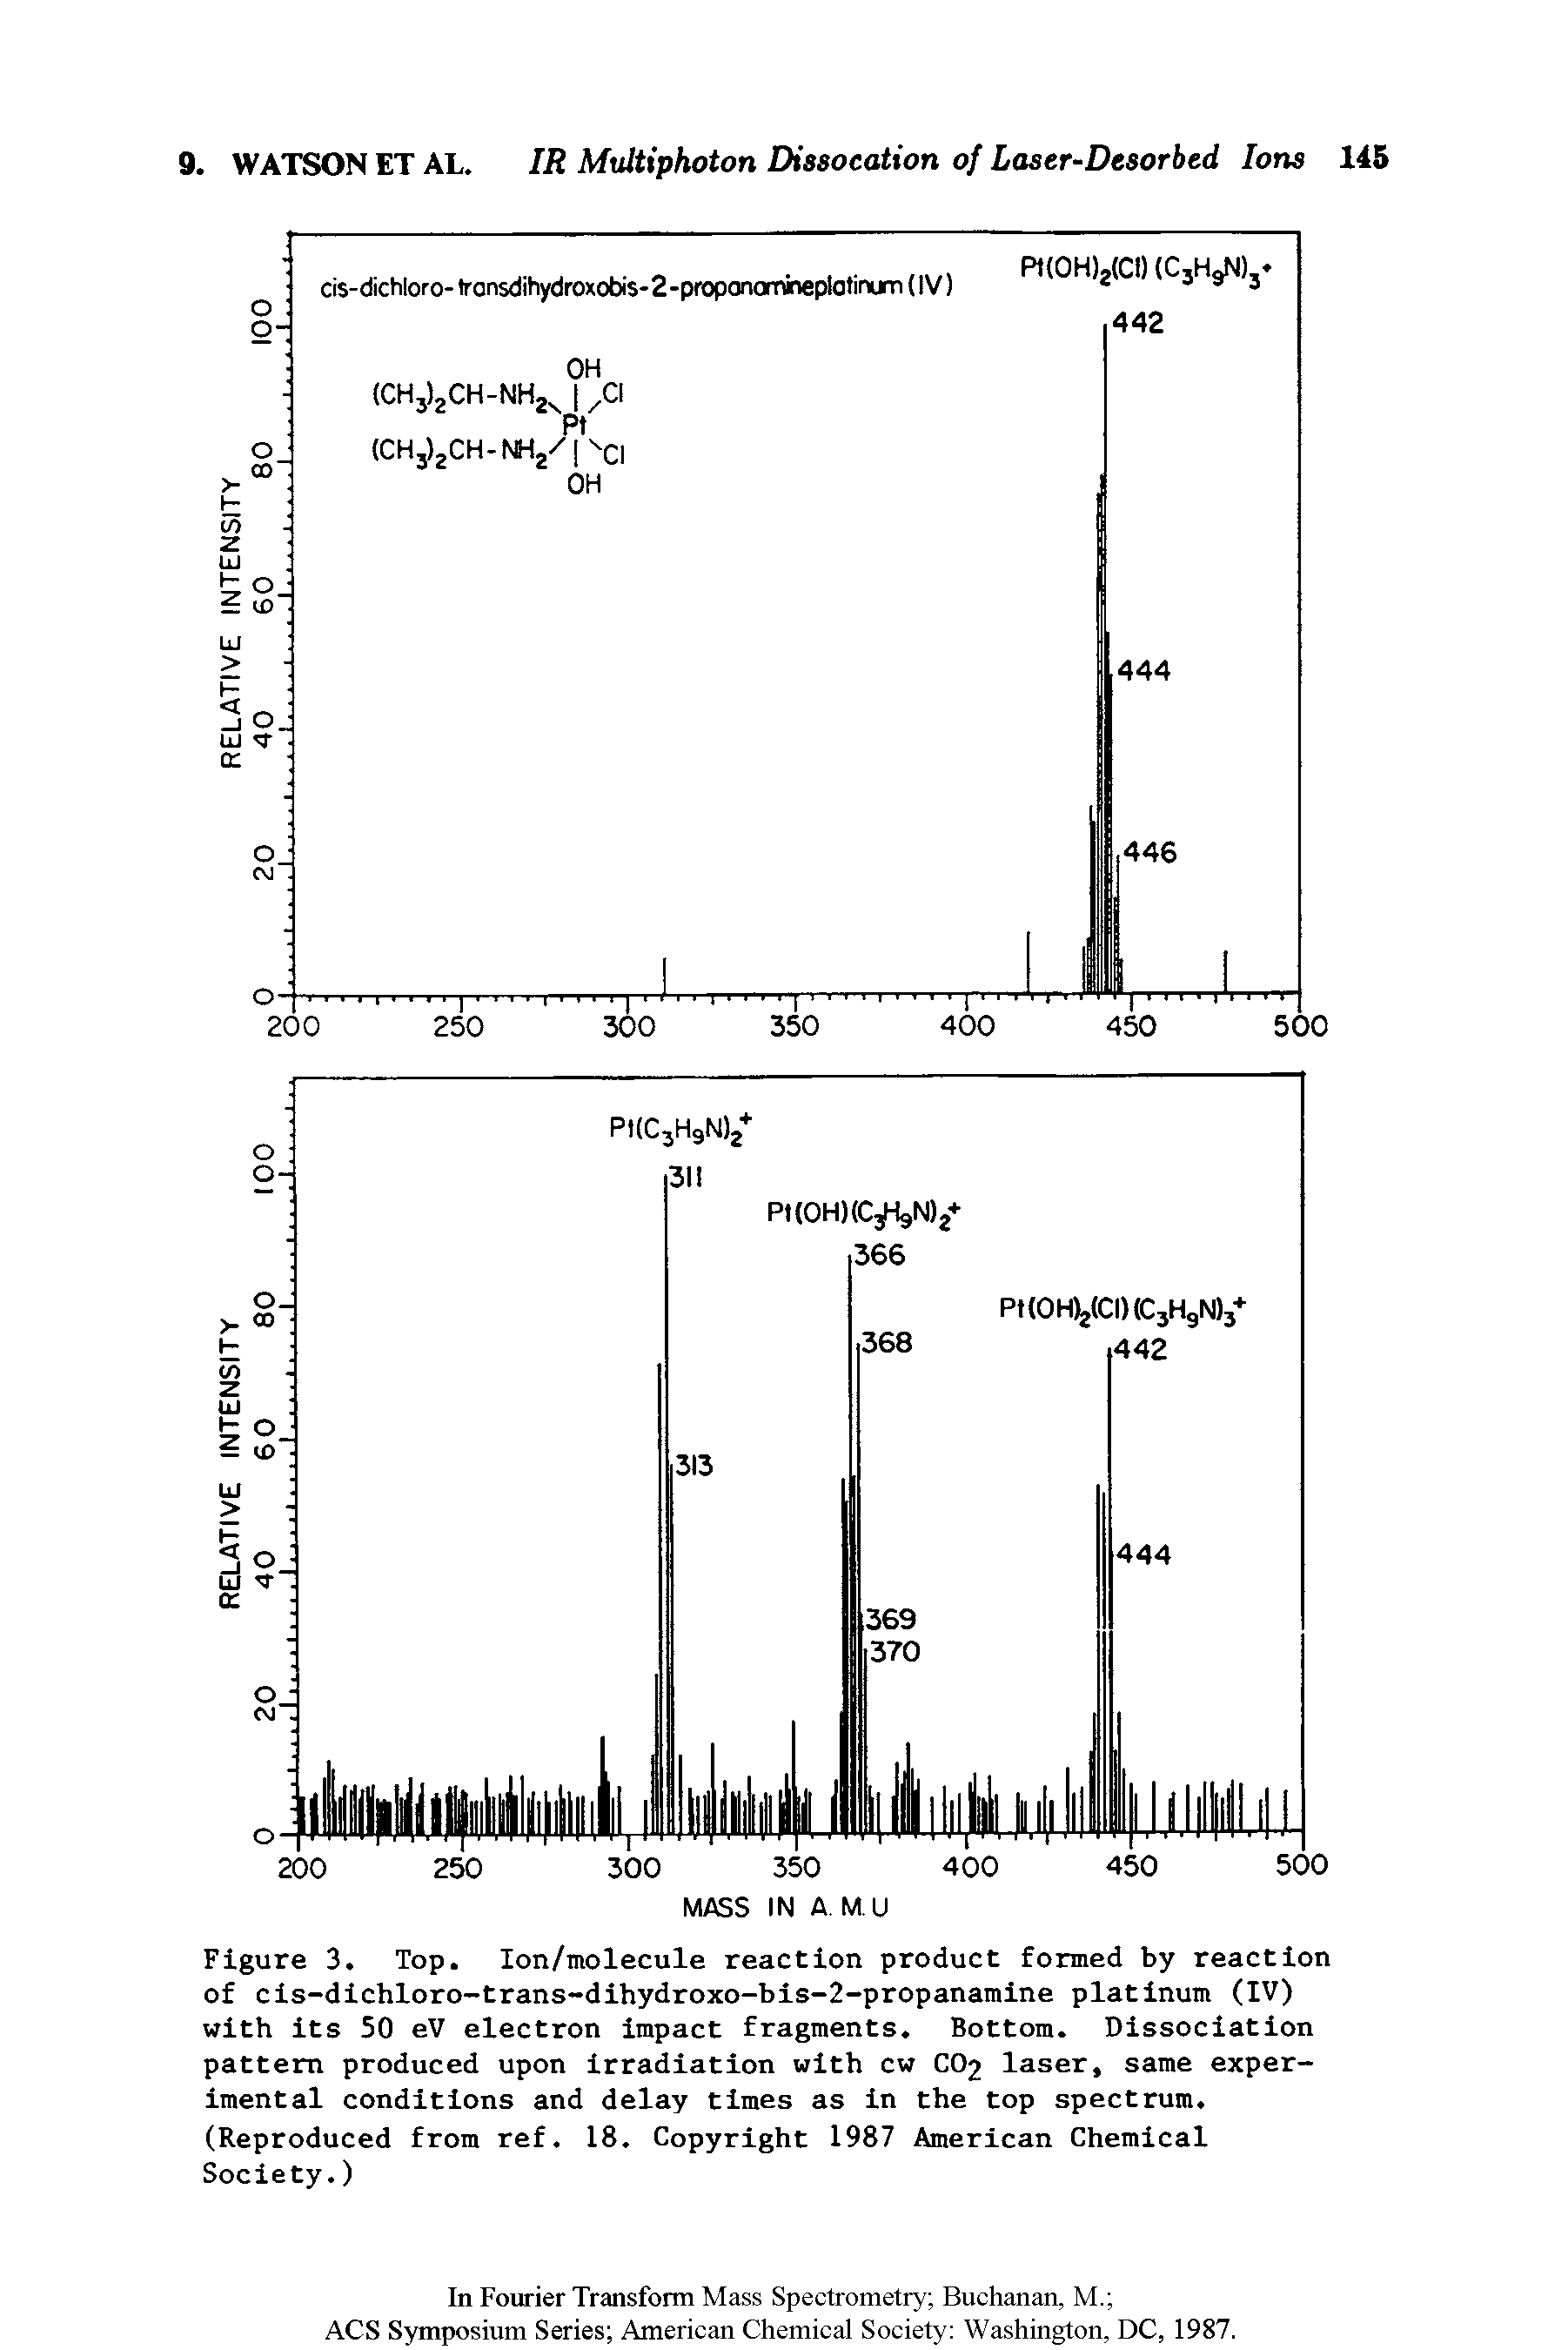 Figure 3. Top. Ion/molecule reaction product formed by reaction of cis-dichloro-trans-dihydroxo-bis-2-propanamine platinum (IV) with its 50 eV electron impact fragments. Bottom. Dissociation pattern produced upon irradiation with cw CO2 laser, same experimental conditions and delay times as in the top spectrum. (Reproduced from ref. 18. Copyright 1987 American Chemical Society.)...